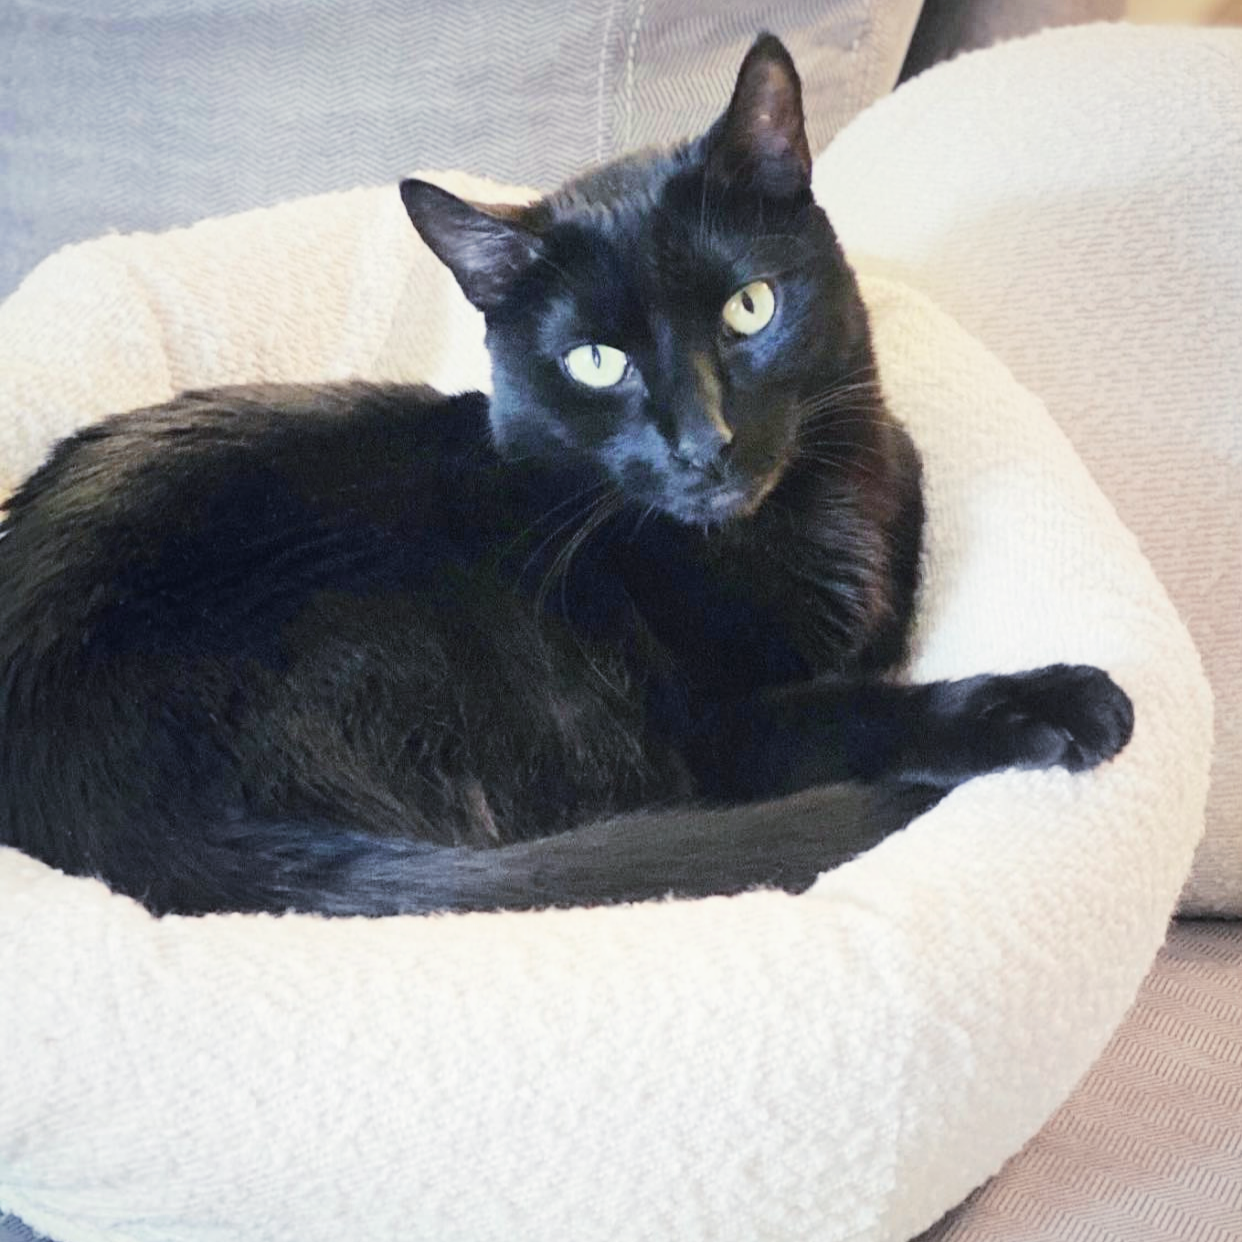 black cat on cat cave turned cat bed by catenary home that is a machine washable cat bed covered to be a cat igloo, and enclosed cat bed, and cat hideaway all in one